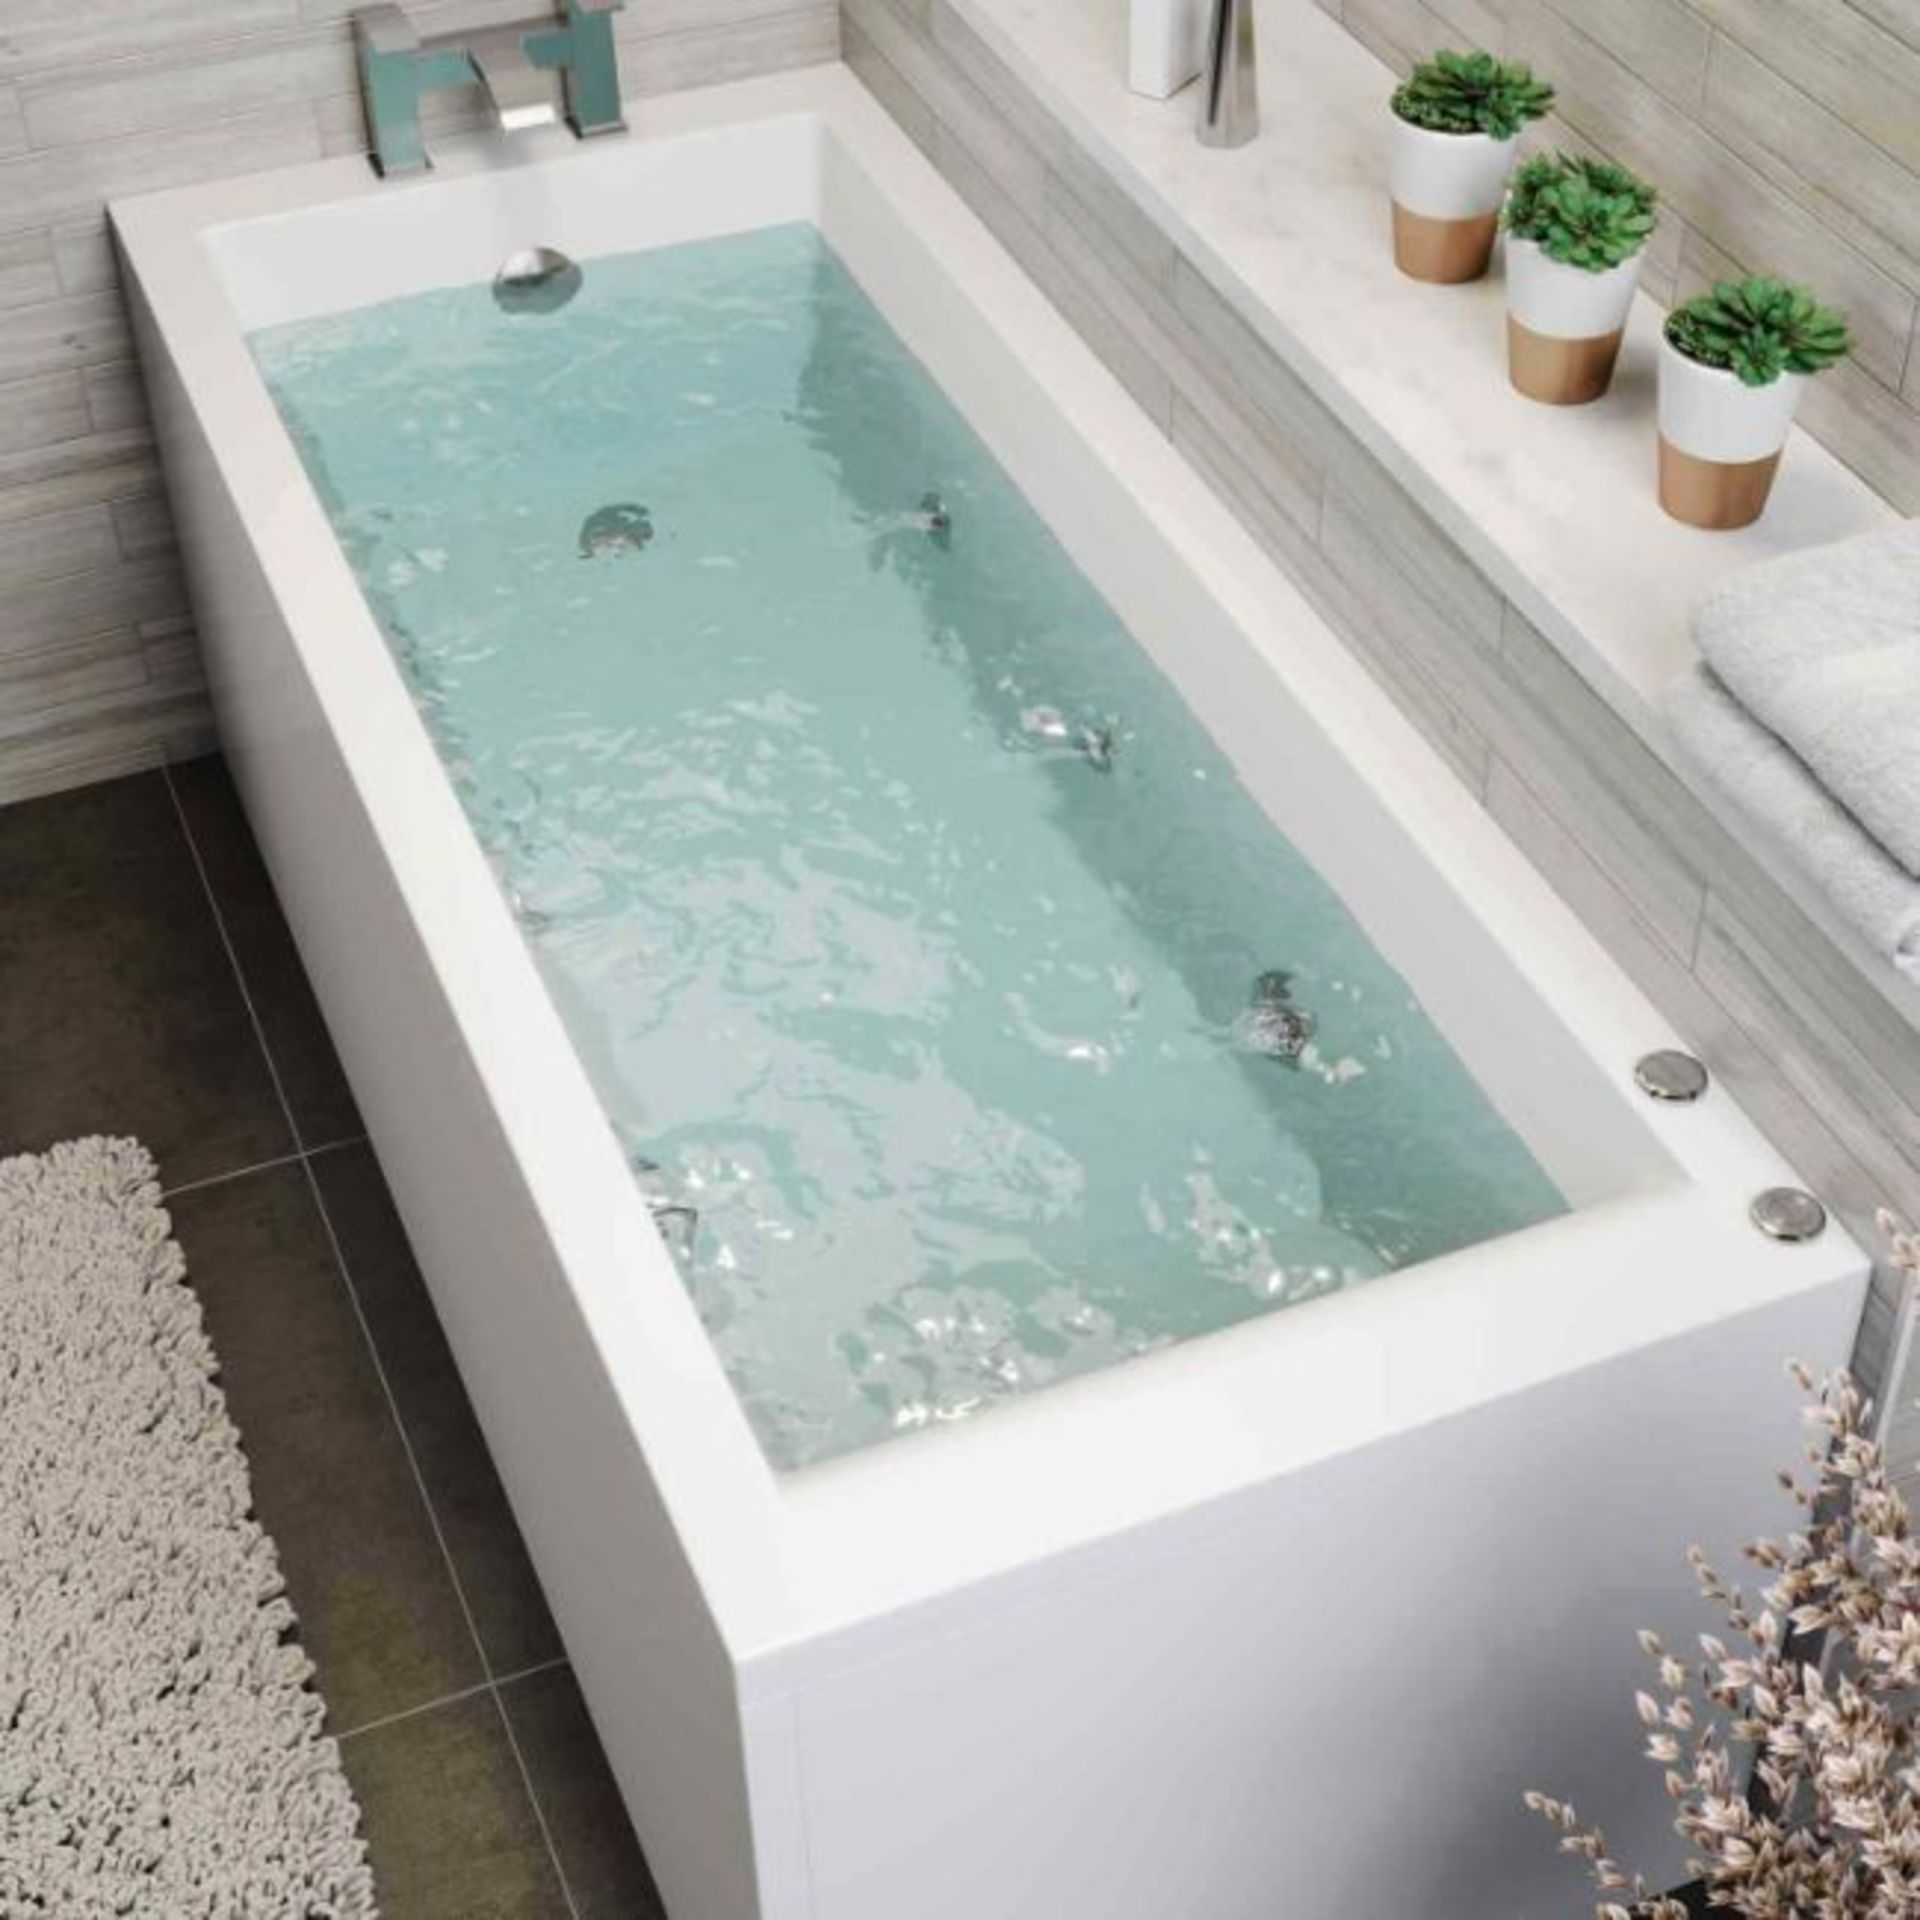 New 1700x700x545mm Whirlpool Jacuzzi Single Ended Bath - 6 Jets. RRP £1,299.99.Spa Experience... - Image 3 of 3